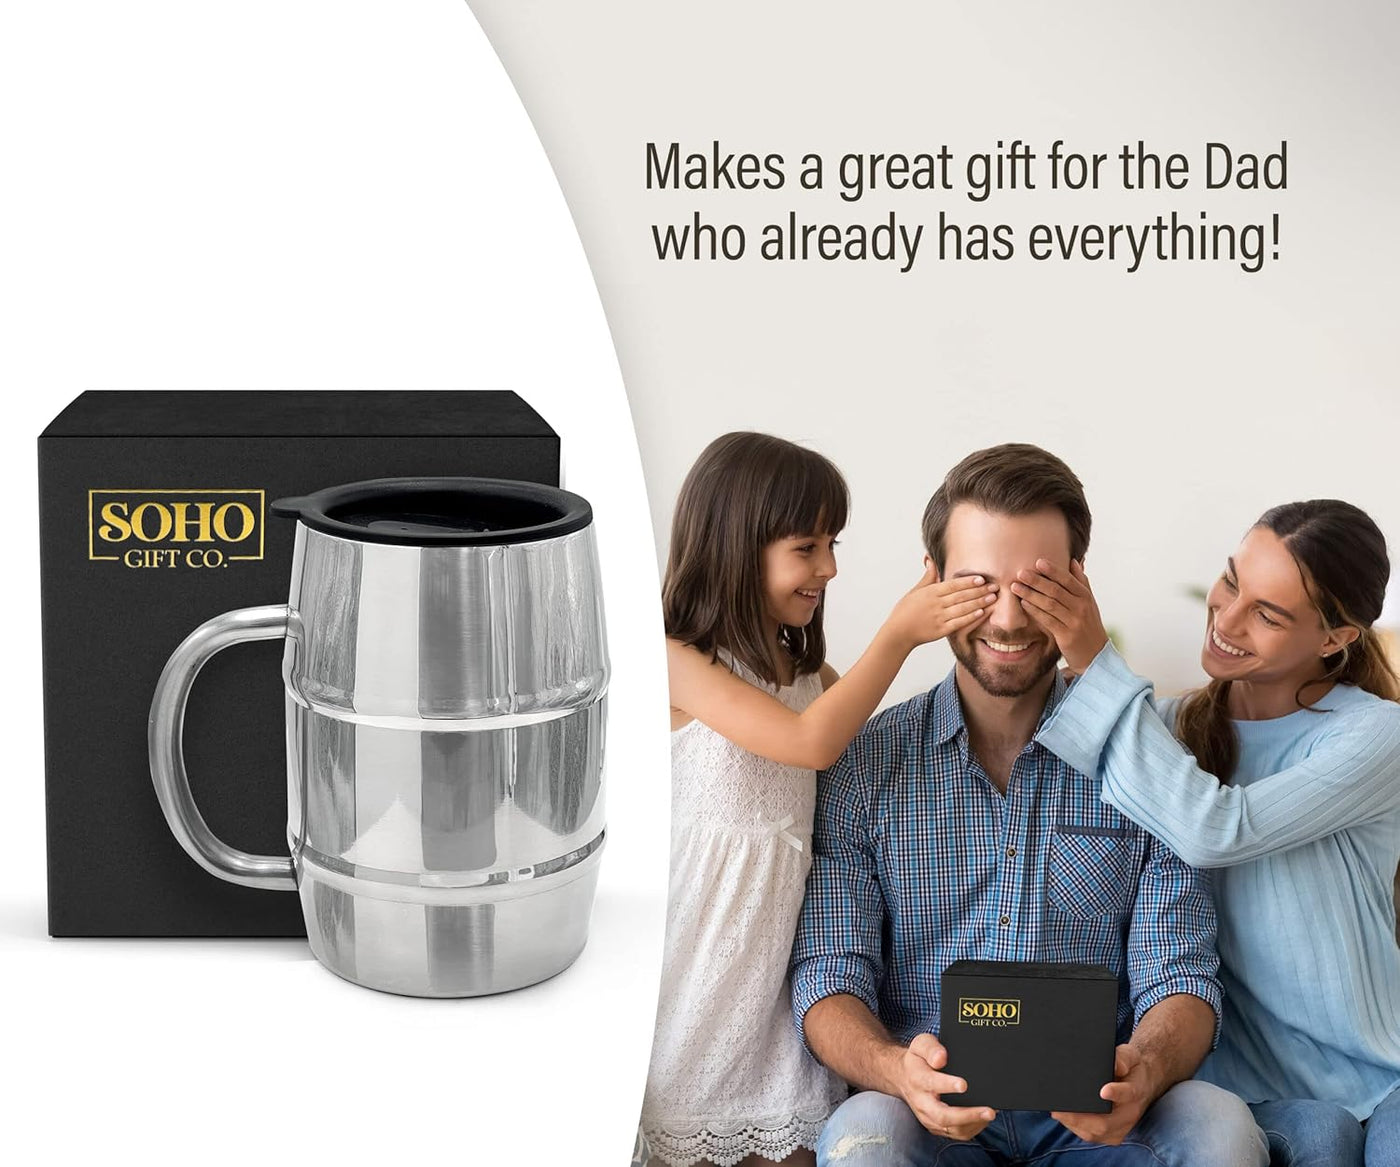 Gift Mug for Dad, Stainless Steel TOP DAD Barrel Cup with Handle and Sip Lid (Hot n' Cold) Double Wall Insulation for Beer & Coffee, 17oz (Gift Boxed for Christmas/Fathers Day)